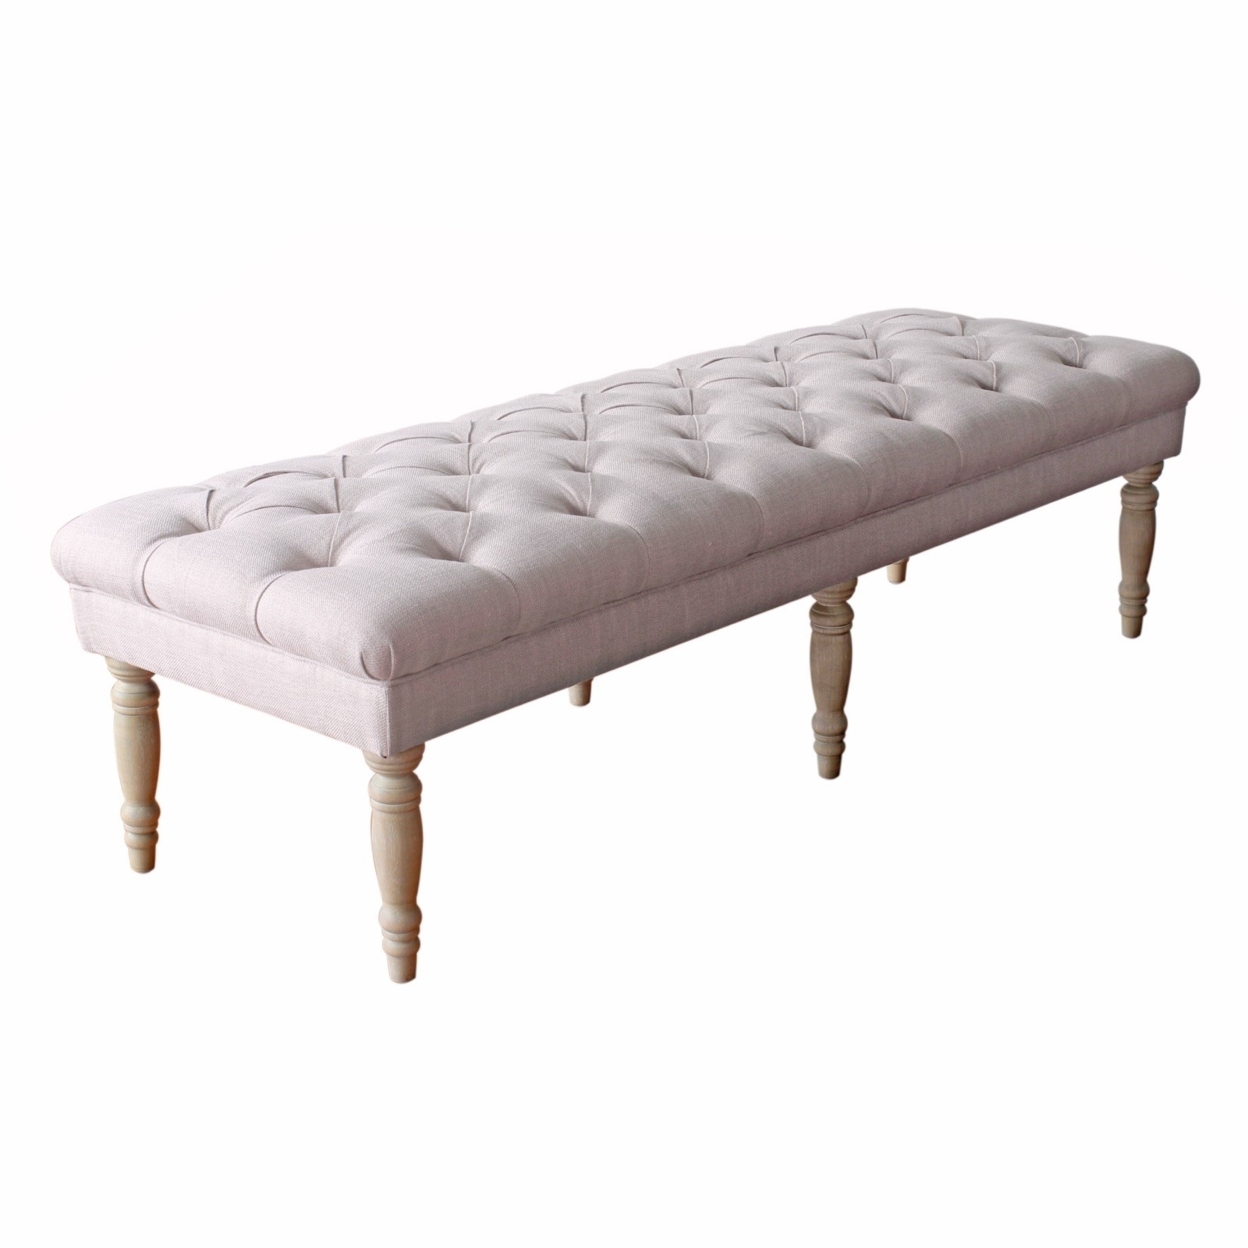 Wooden Bench With Button Tufted Fabric Upholstered Seat And Turned Legs, Cream- Saltoro Sherpi